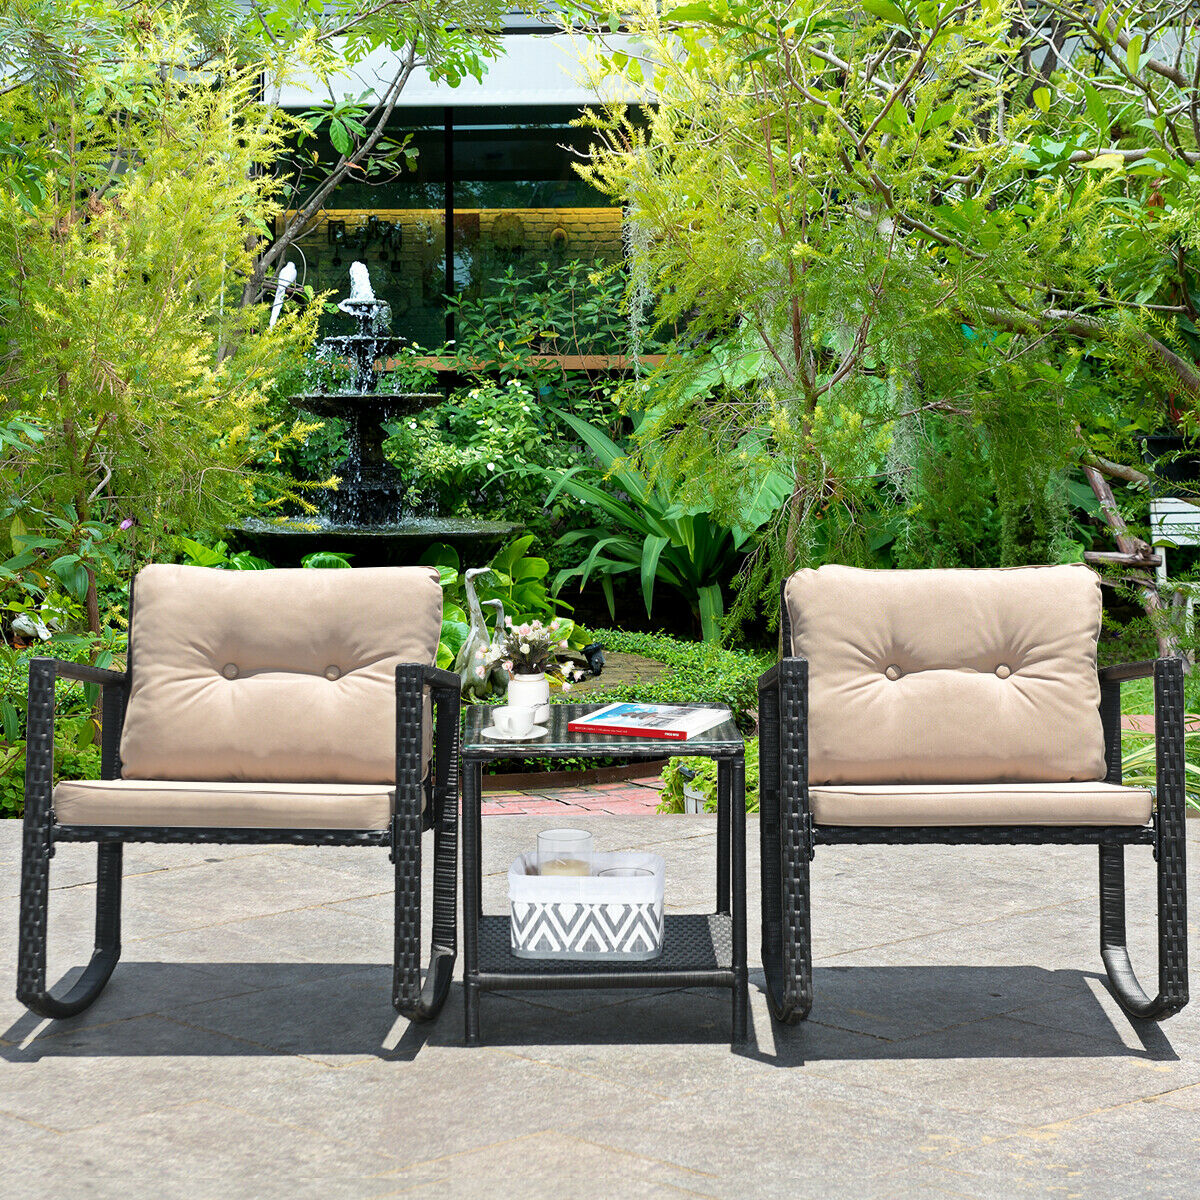 Gymax Set of 3 Rattan Rocking Chair Cushioned Sofa Unit Garden Patio Furniture - image 3 of 7